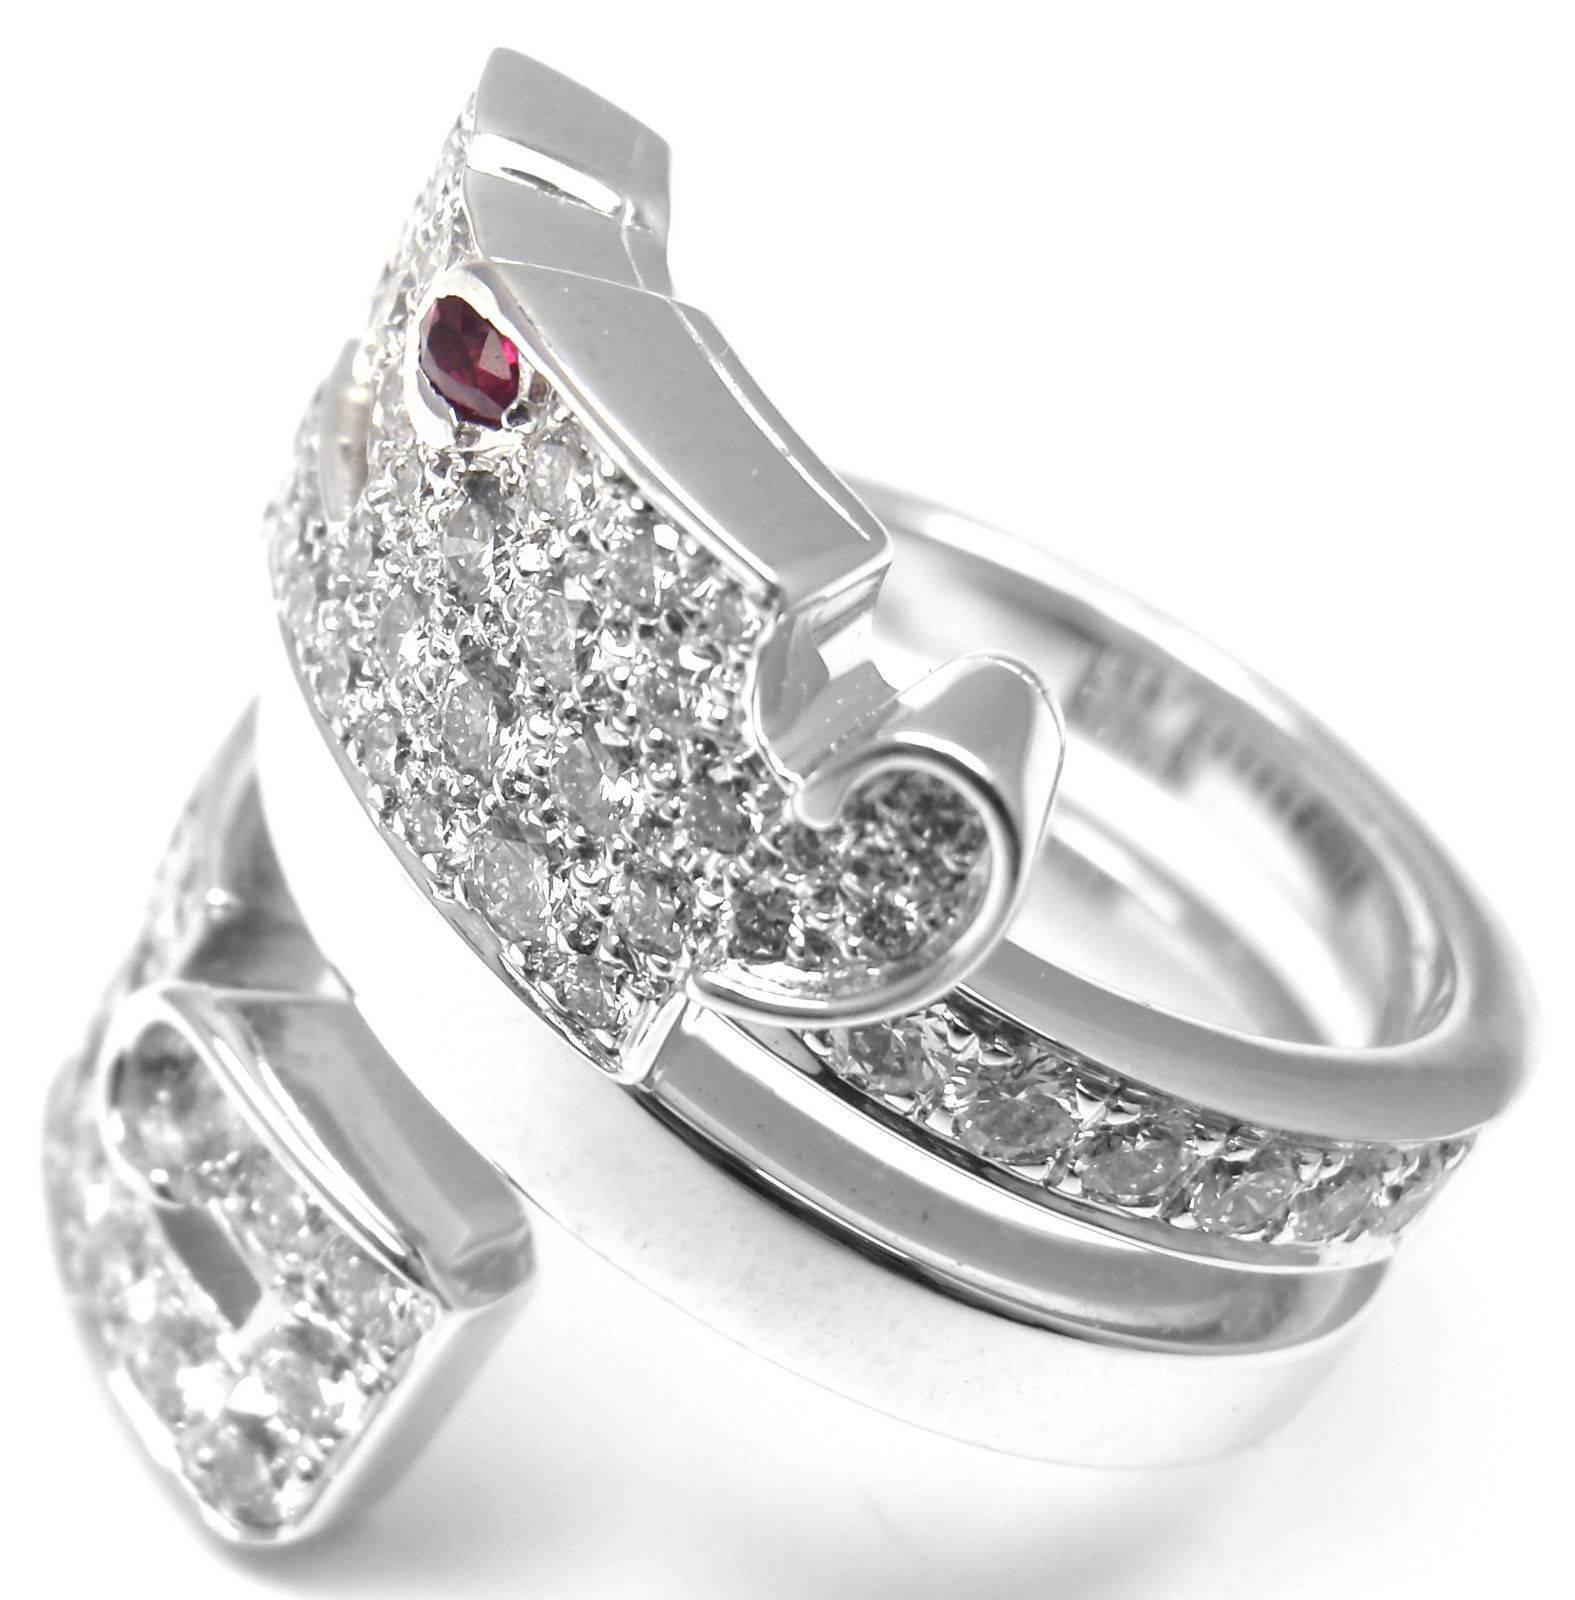 18k White Gold Le Baiser Du Dragon Diamond Ruby Ring by Cartier. 

With 56 round brilliant cut diamonds VVS1 clarity, E color total weight 
approx. 1.68ct
This ring comes with its original Cartier box. 

Details: 
Ring Size: European 53 US 6